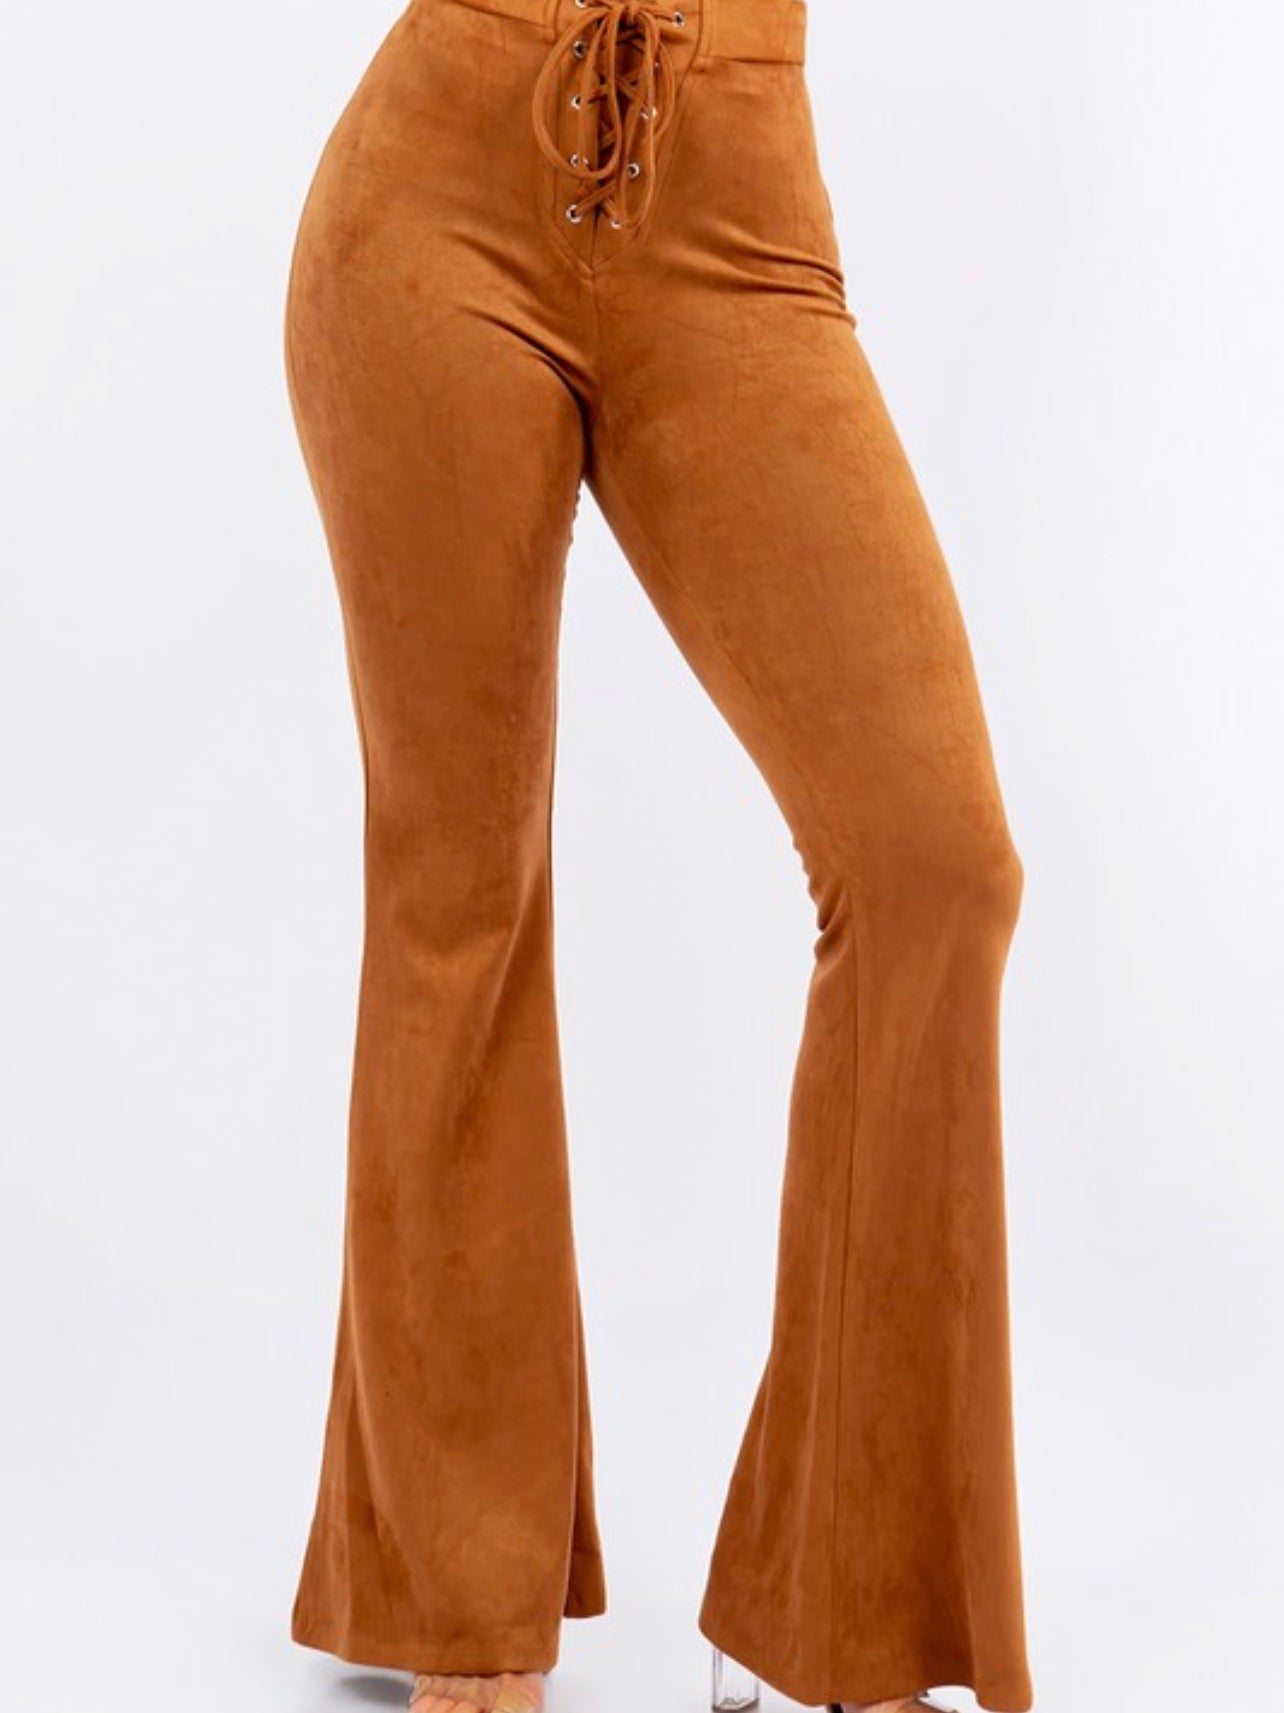 Lace Up Seude Camel Flare Pants